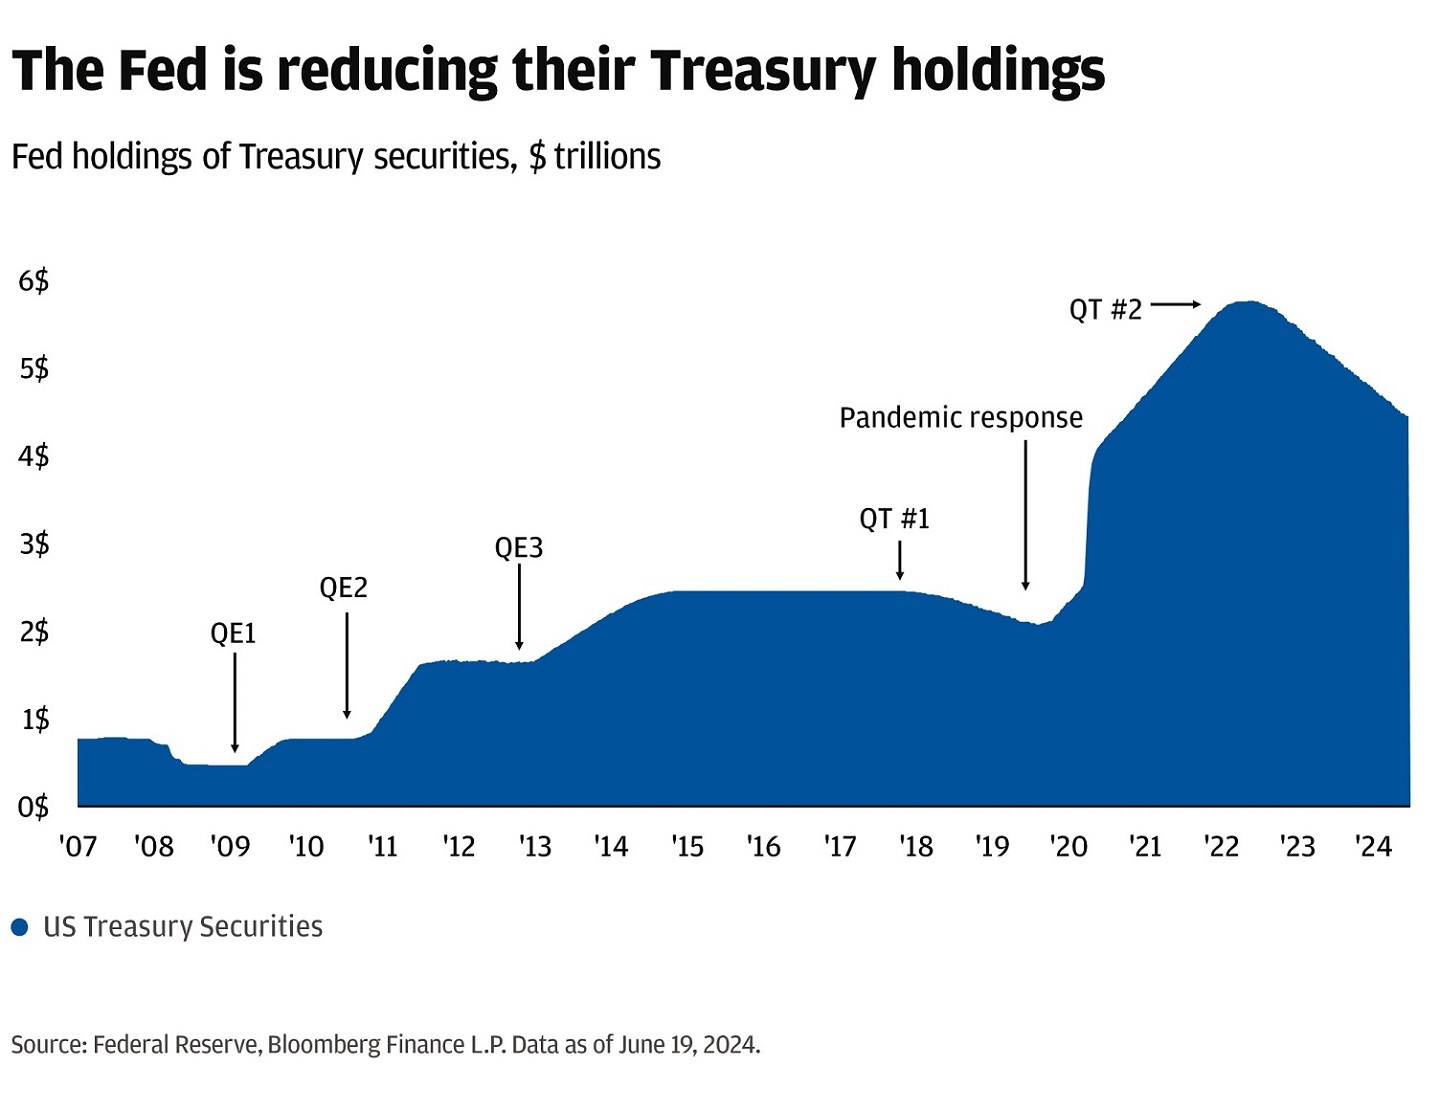 This chart shows the US Treasury’s holdings of securities in trillions of US dollars from 2007 to the present and indicates periods of quantitative easing and tightening.